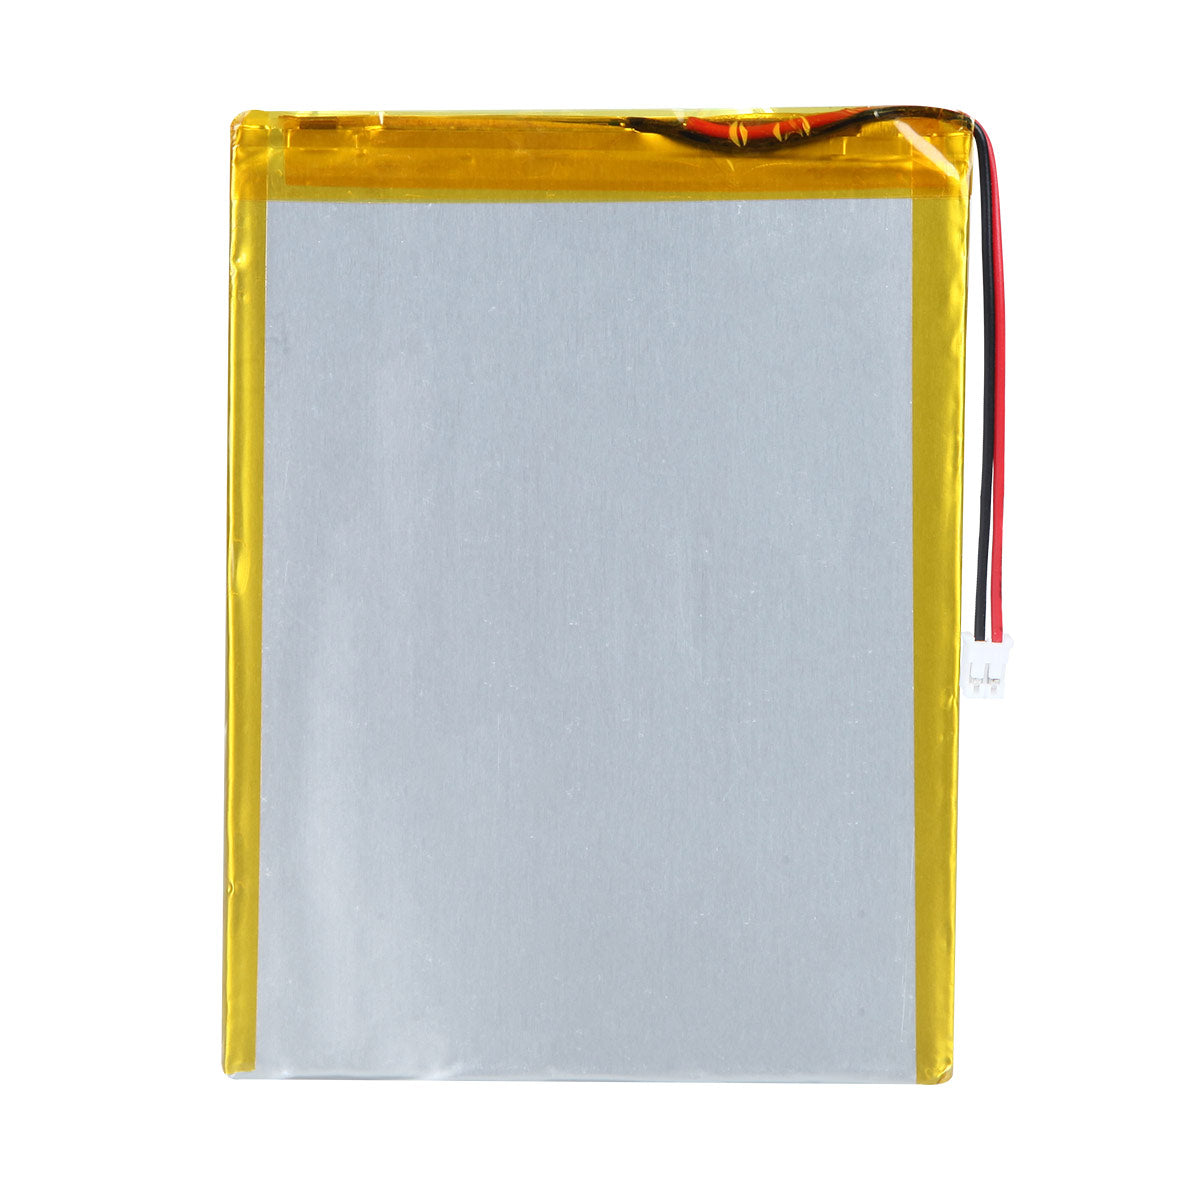 YDL 3.7V 4200mAh 4085106 Rechargeable Lithium Polymer Battery Length 108mm